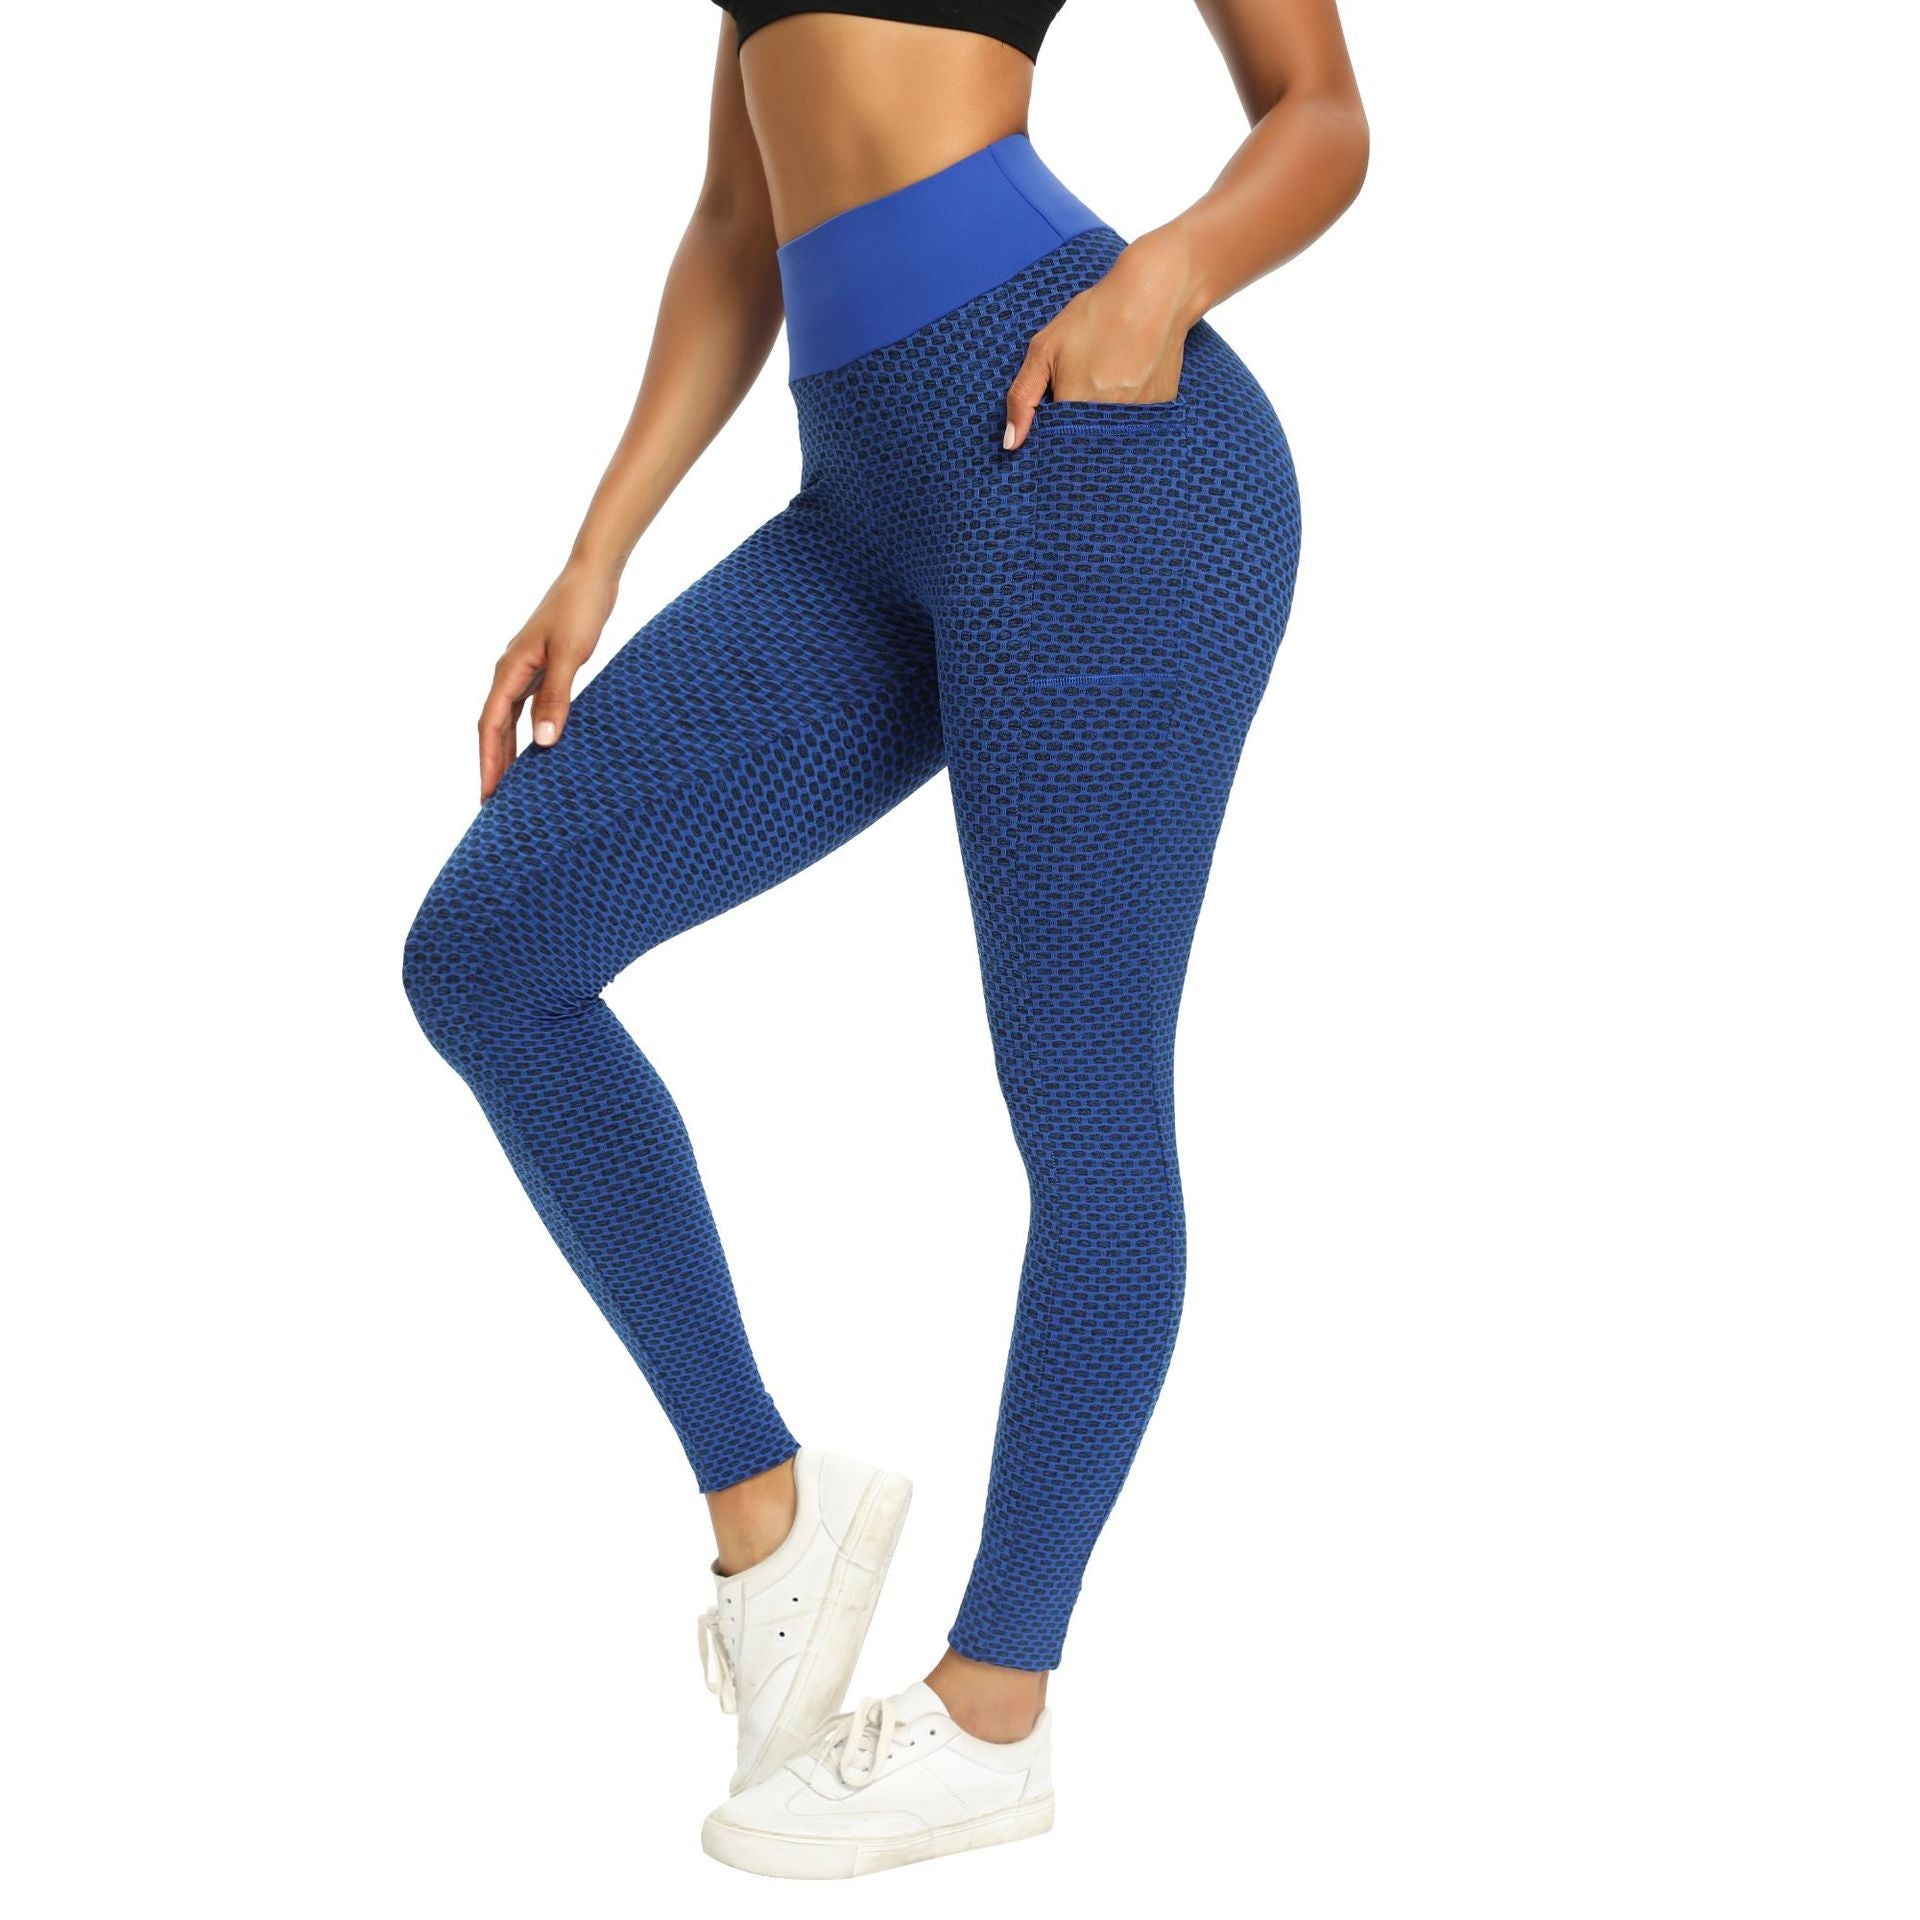 Women's Honeycomb Bubble Ninth Pants with Pockets Sports Fitness Running Yoga Clothes 9776